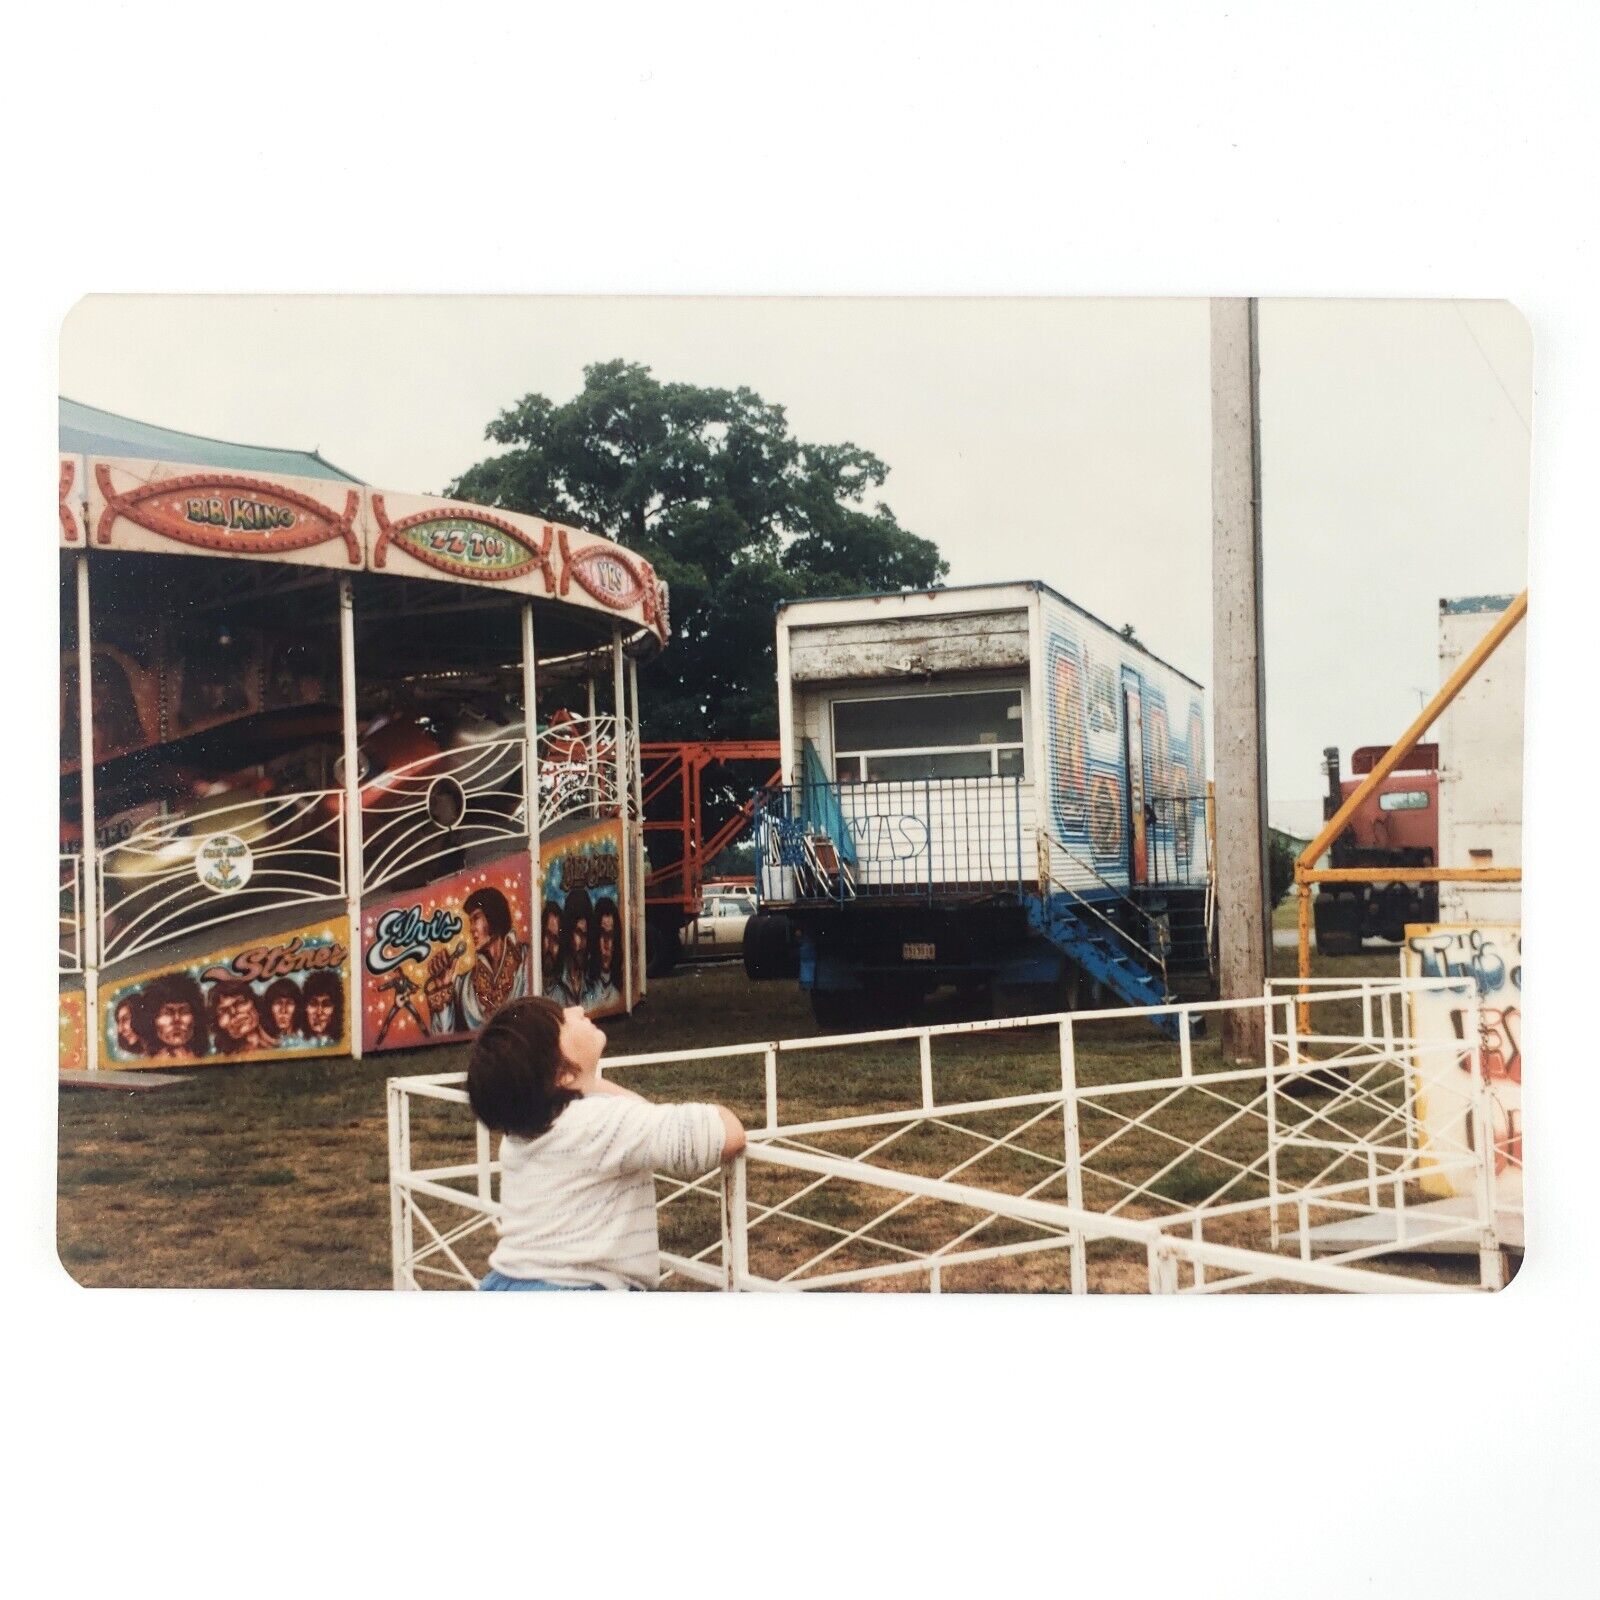 Child Looking Up Carnival Photo 1980s Amusement Park Ride BB King ZZ Top B1968